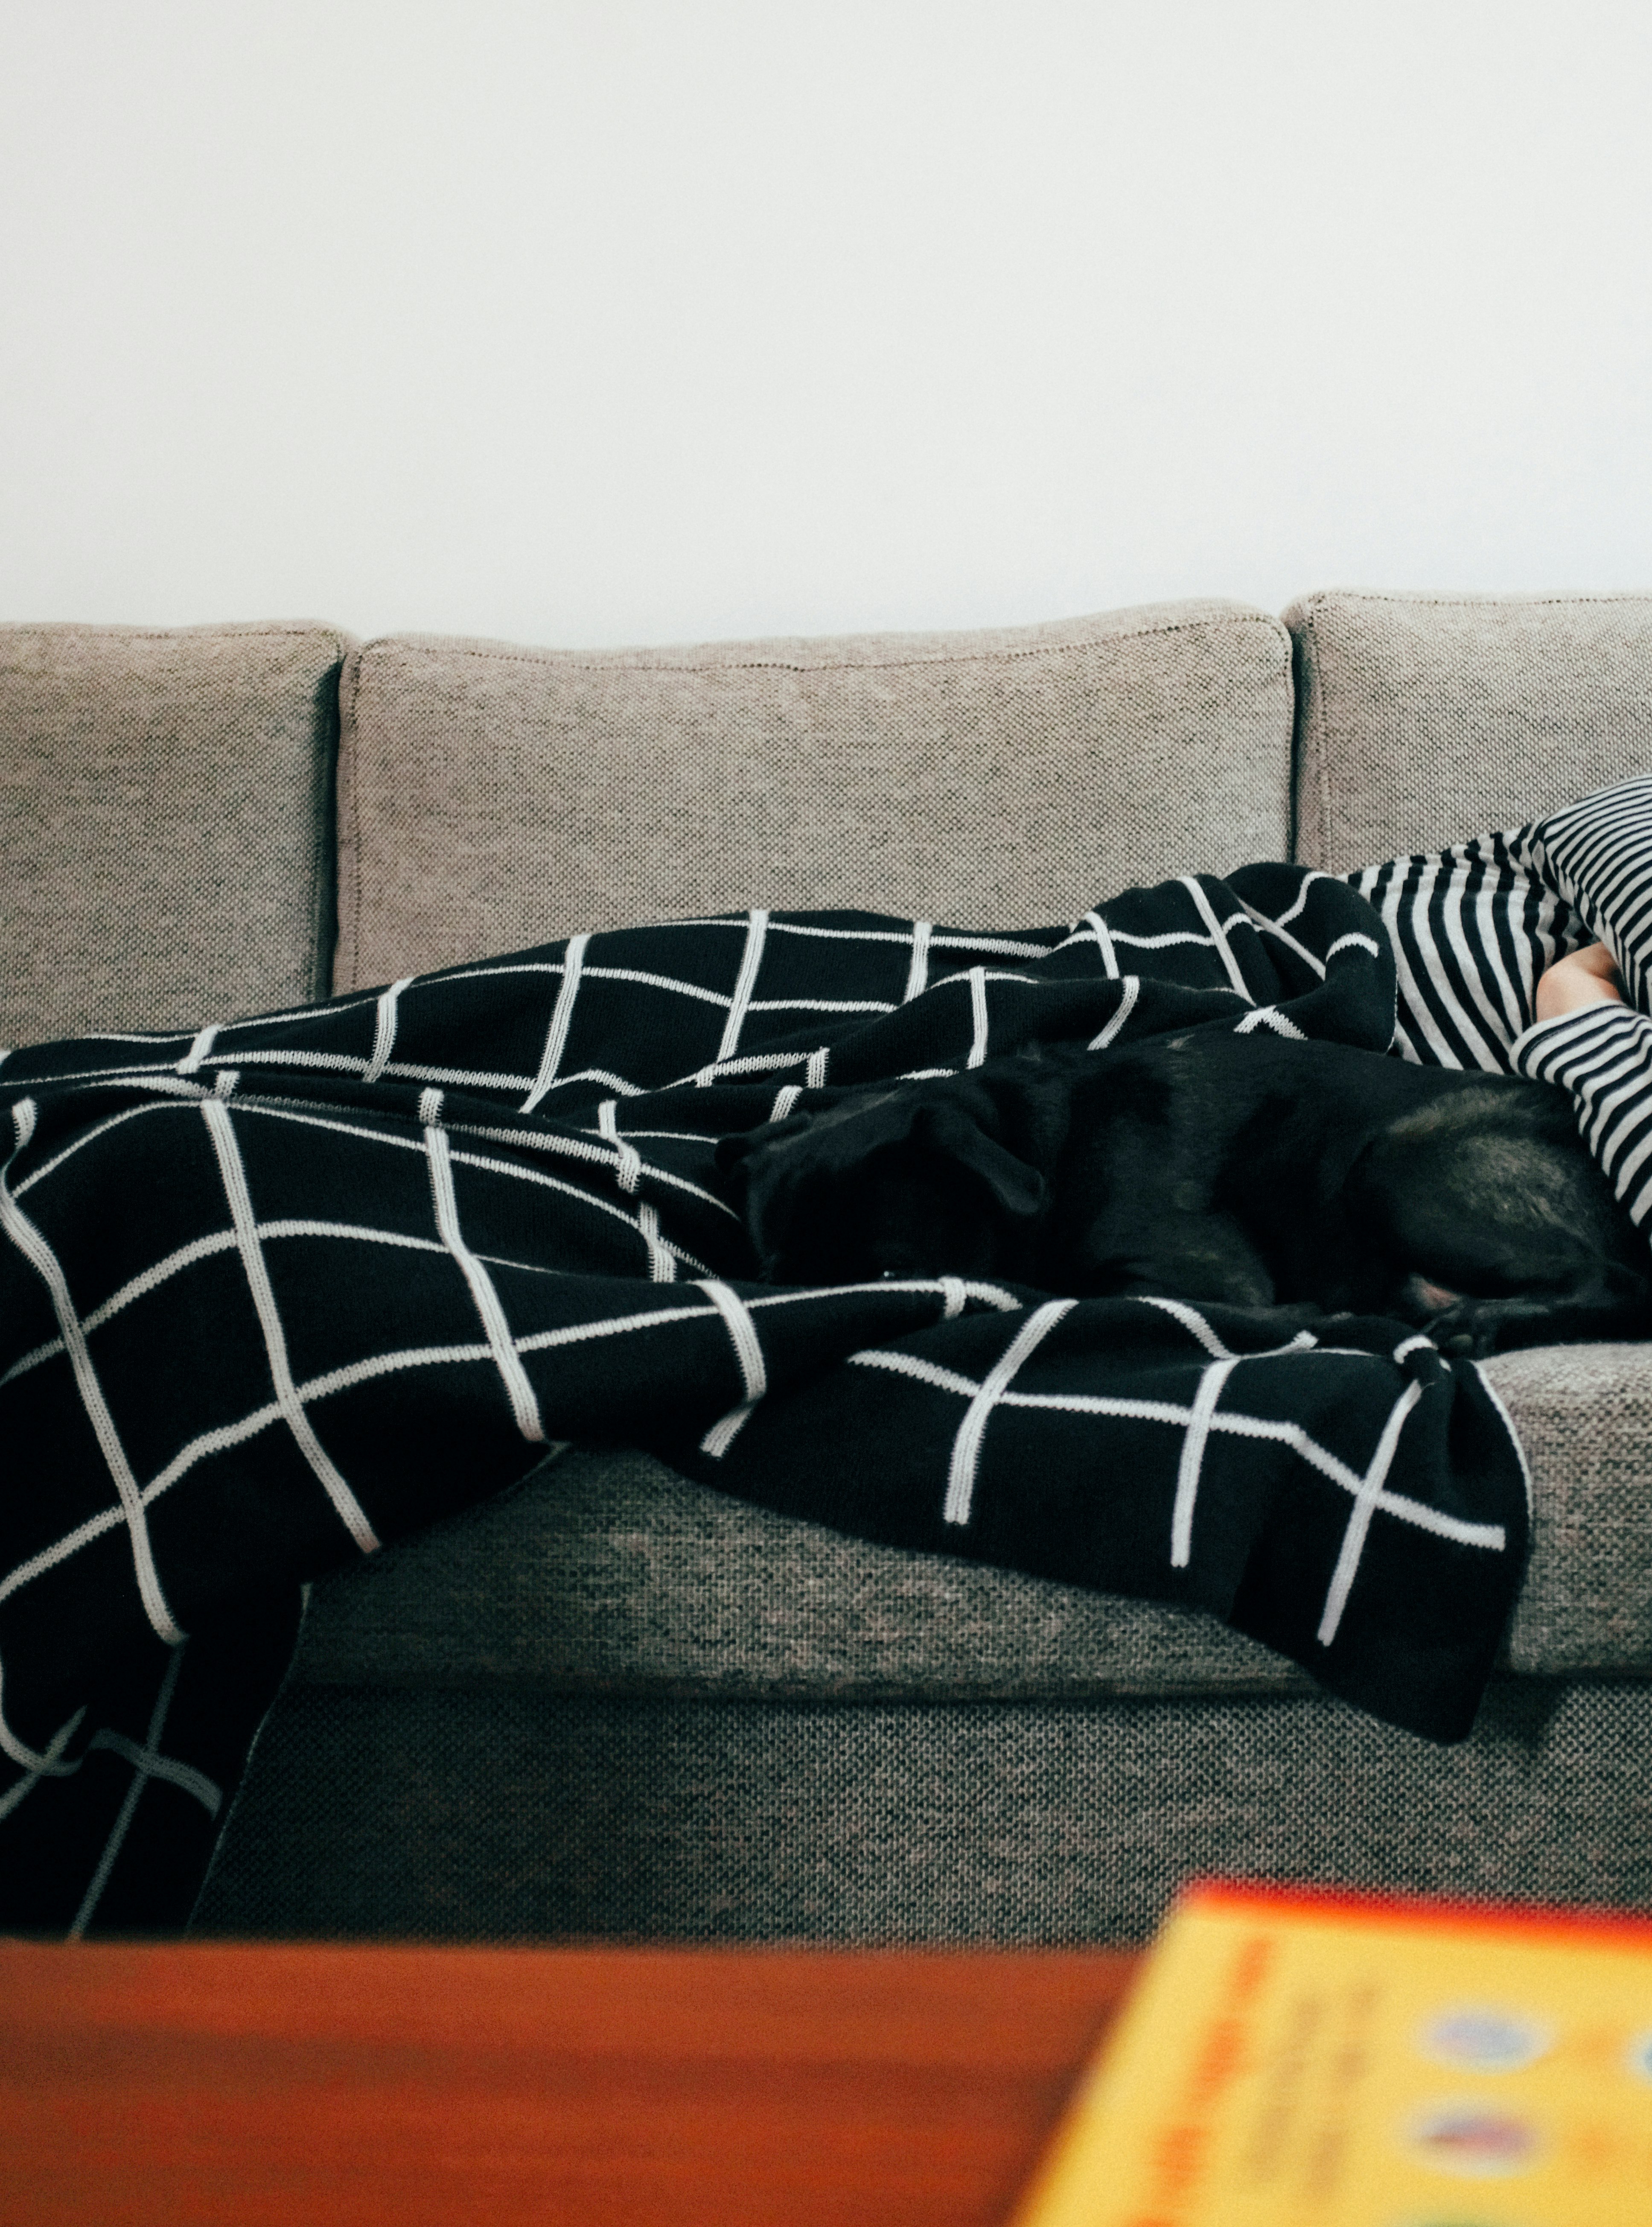 person in black and white striped pants lying on brown couch